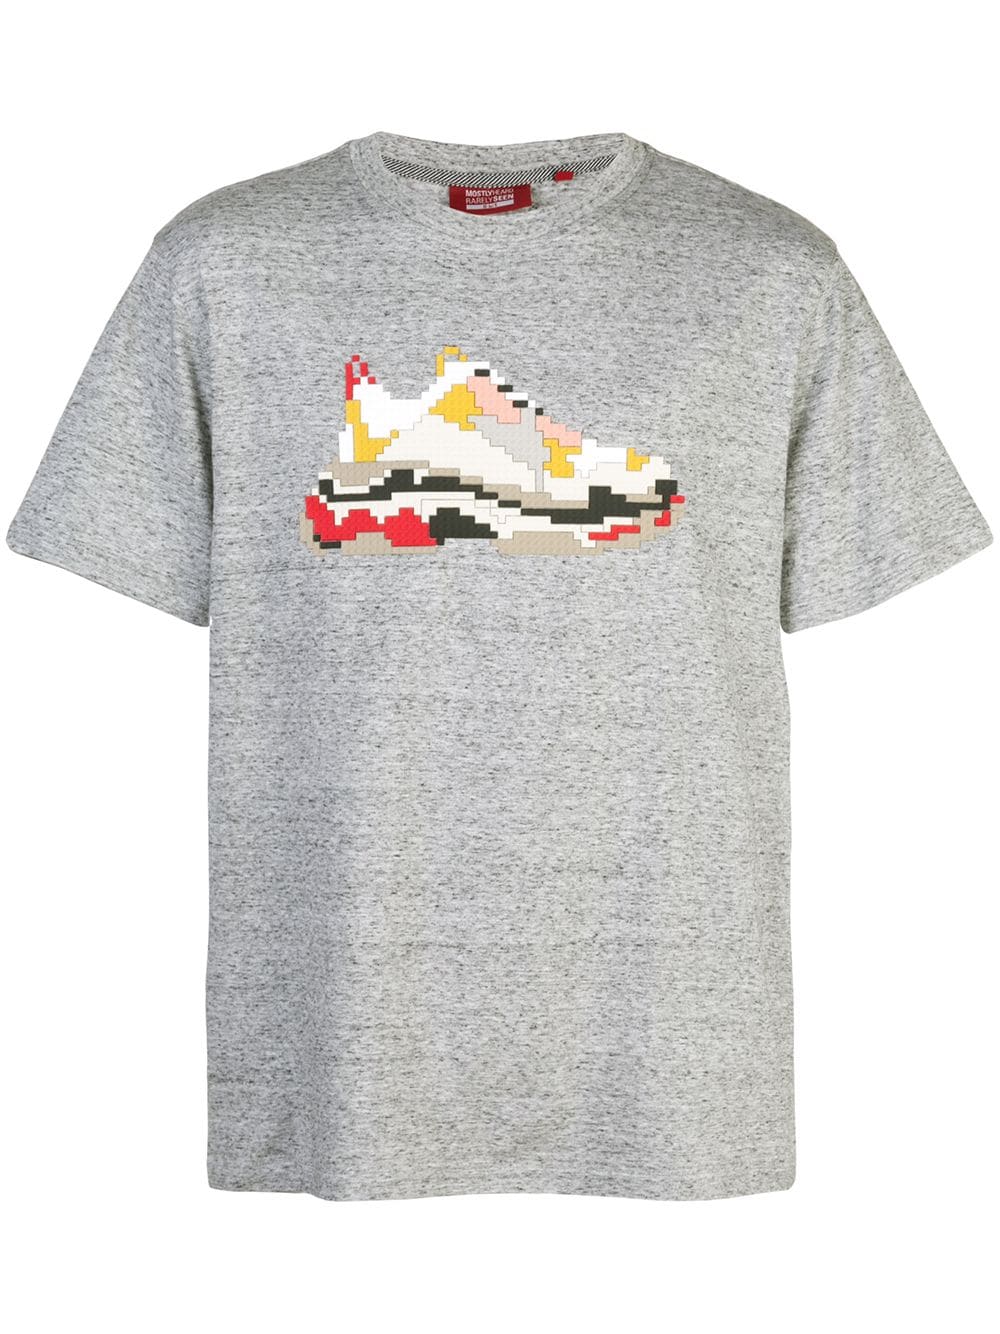 Mostly Heard Rarely Seen 8-Bit Dadcore T-shirt for men | MHEB02AIT41 at Farfetch.com